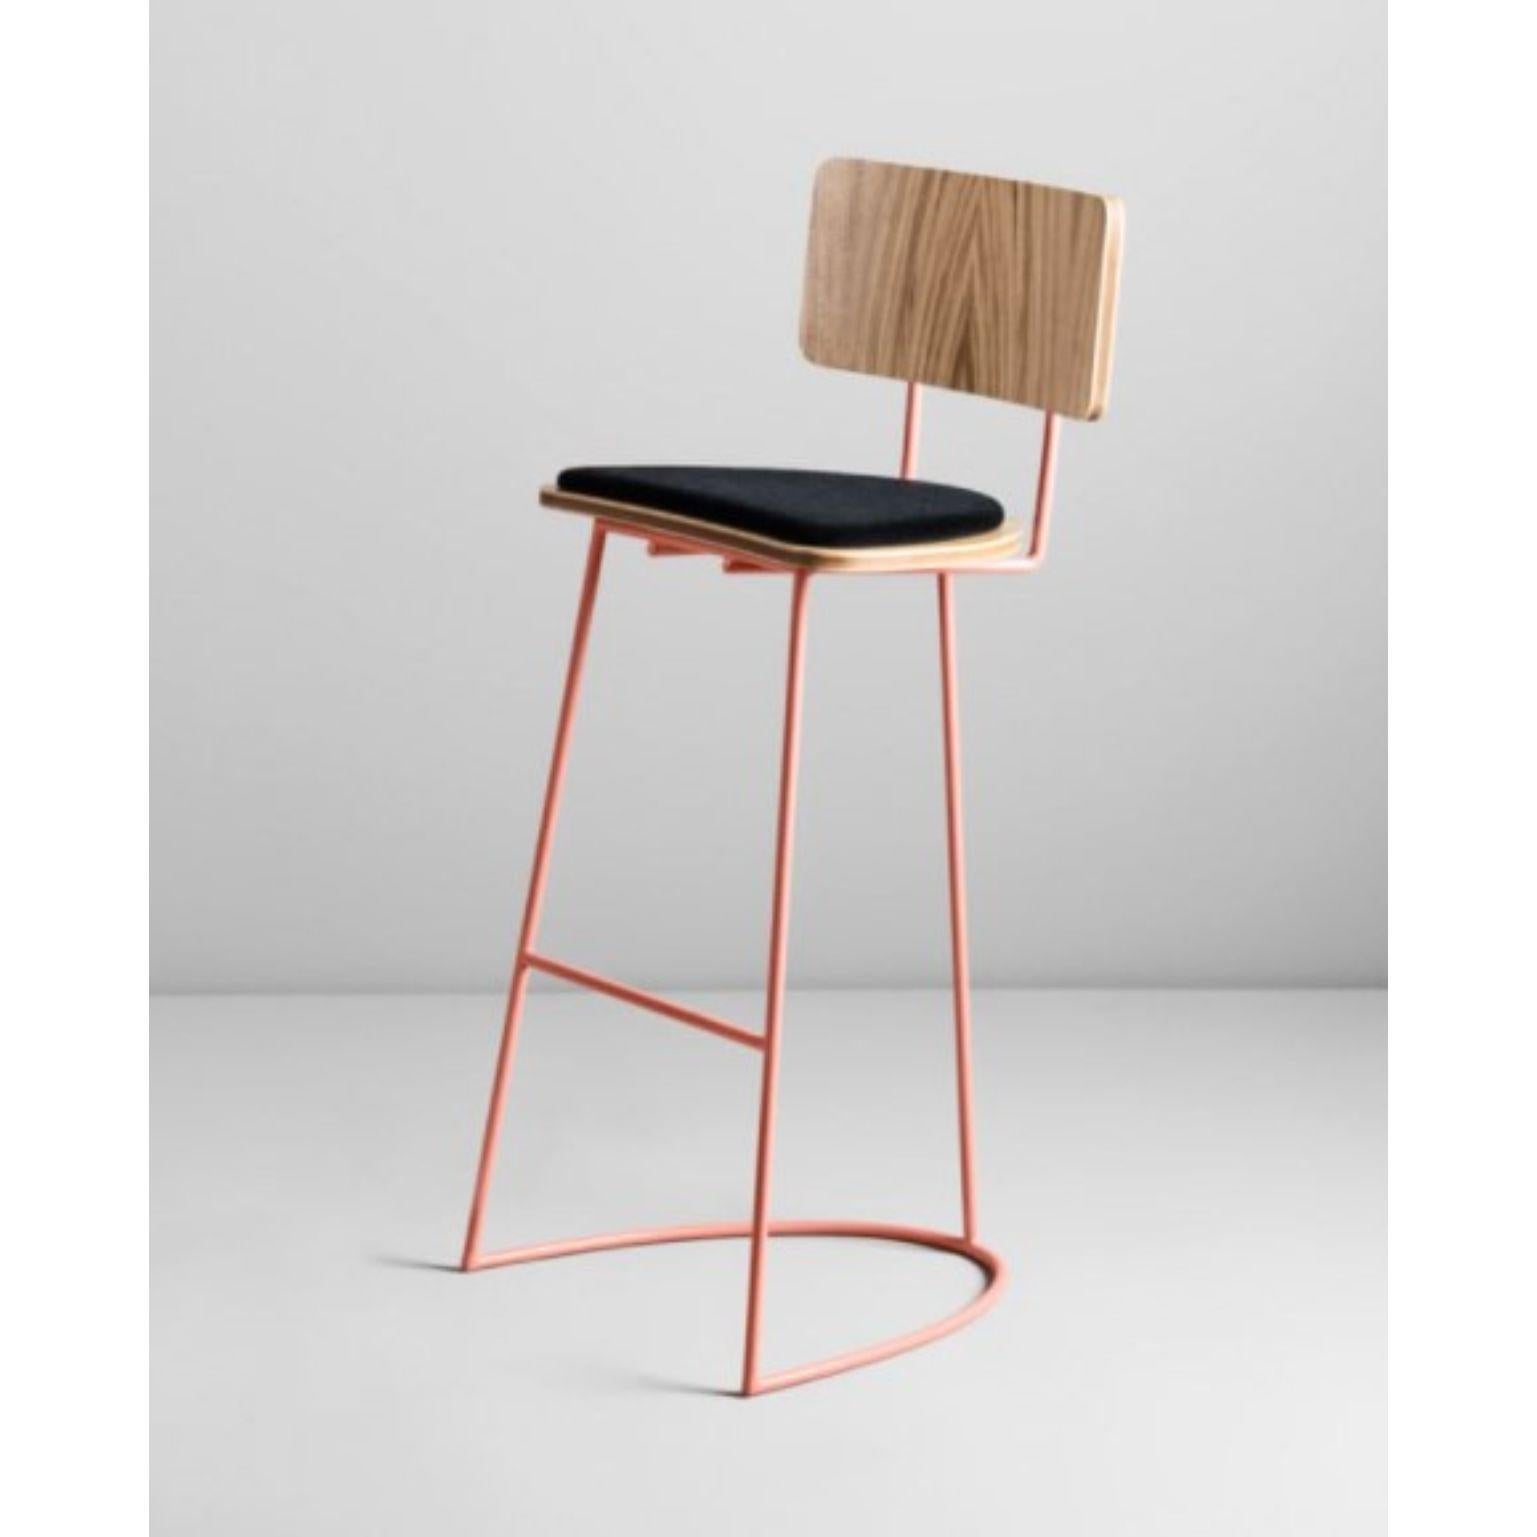 Pair of boomerang stools with backrest & copper finishings by Pepe Albargues
Dimensions: W 47, D 48, H 108, Seat 79
Materials: Paint coated iron structure (copper /chromed / gold iron structure) 
Plywood backrest and seat covered with a natural